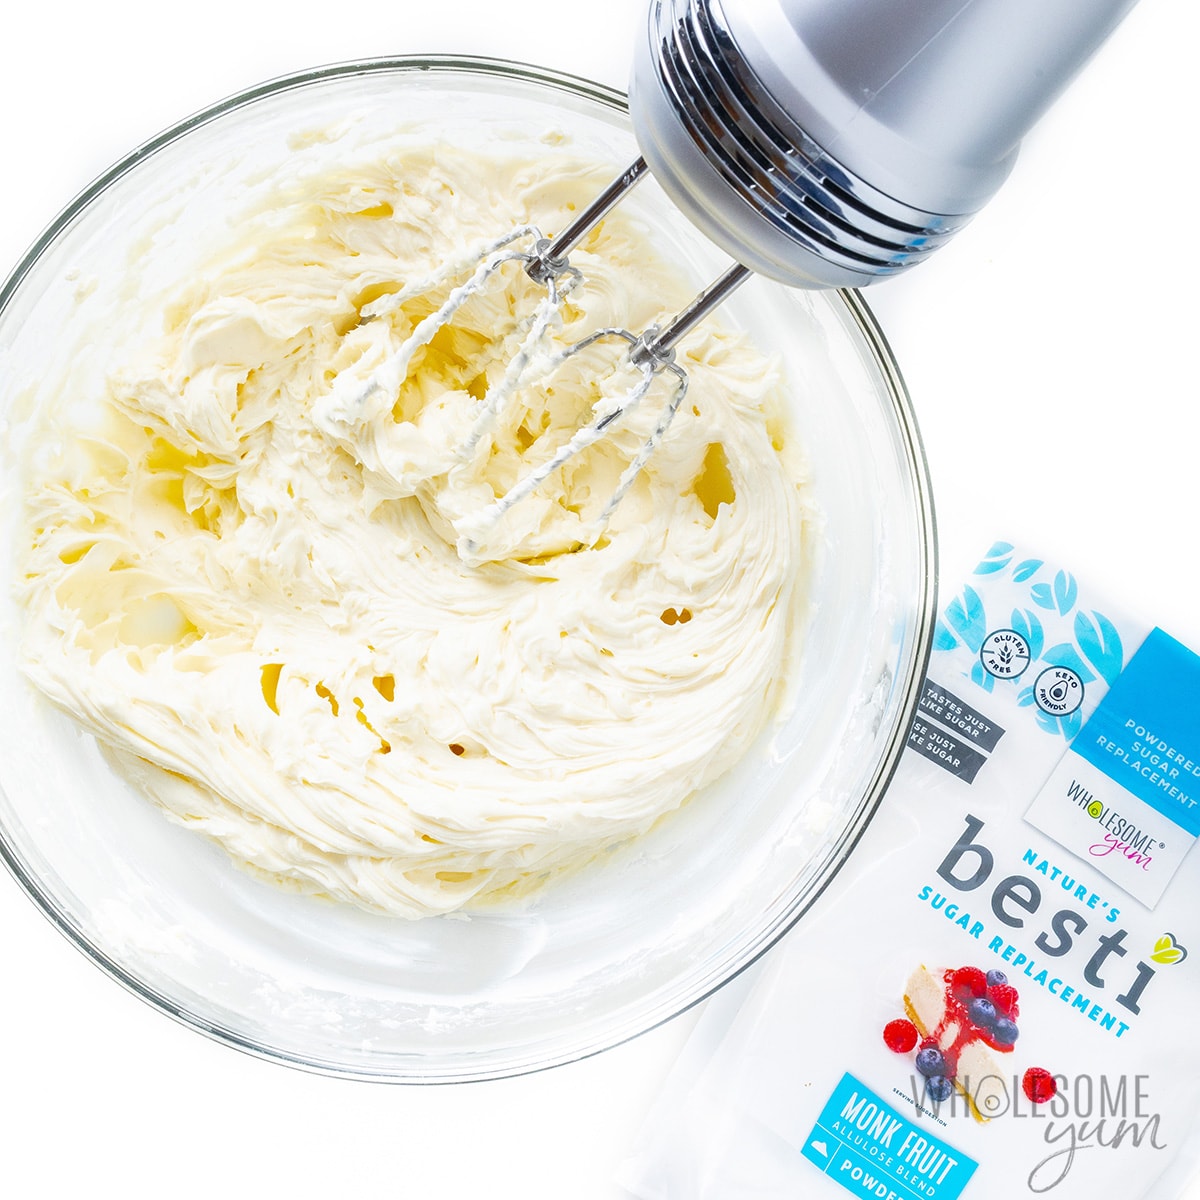 Beat cream cheese with Besti powder in a bowl.